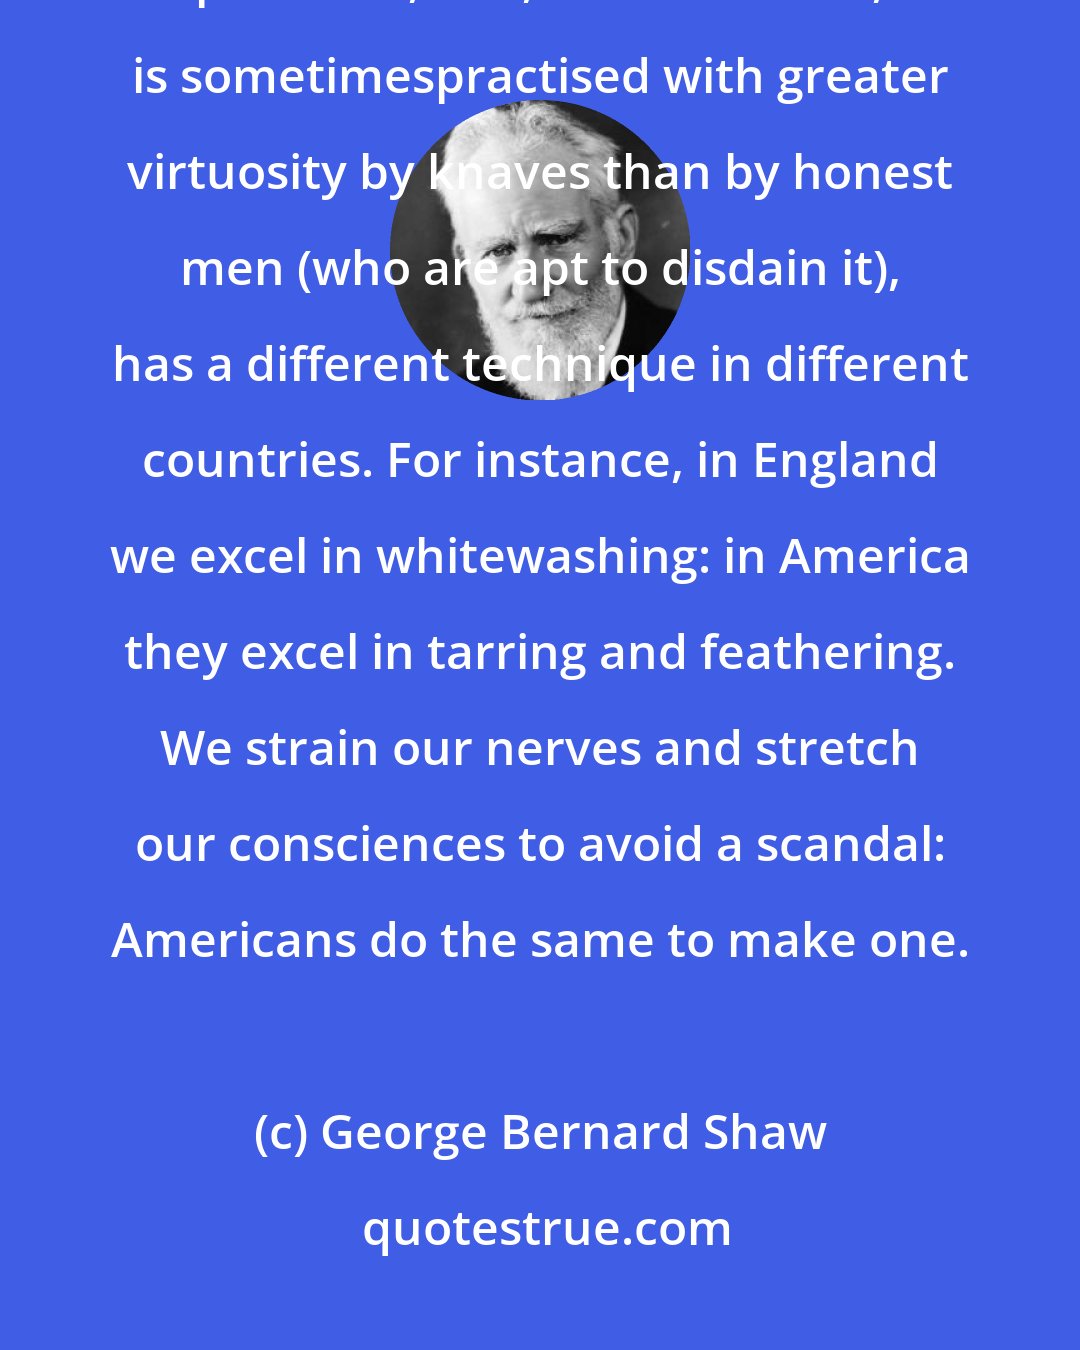 George Bernard Shaw: The art of manipulating public opinion, which is a necessary art for the democratic politician, and, like other arts, is sometimespractised with greater virtuosity by knaves than by honest men (who are apt to disdain it), has a different technique in different countries. For instance, in England we excel in whitewashing: in America they excel in tarring and feathering. We strain our nerves and stretch our consciences to avoid a scandal: Americans do the same to make one.